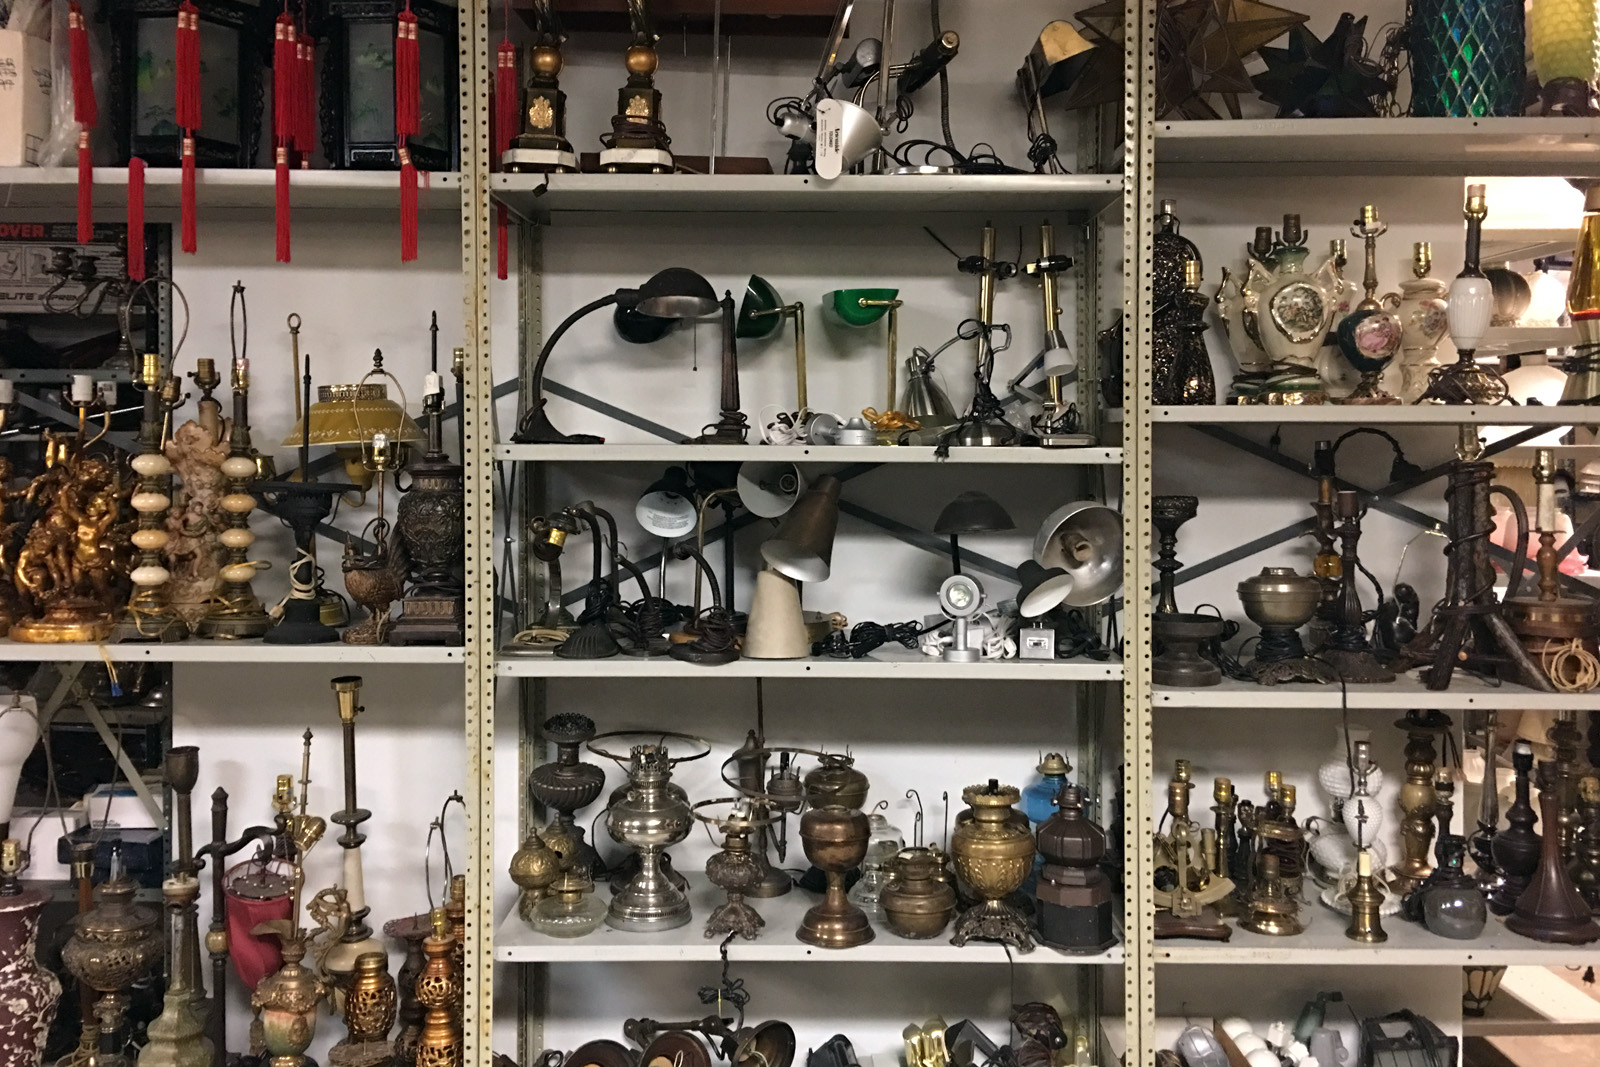 A Visit to the Alley Theatre Prop Storage